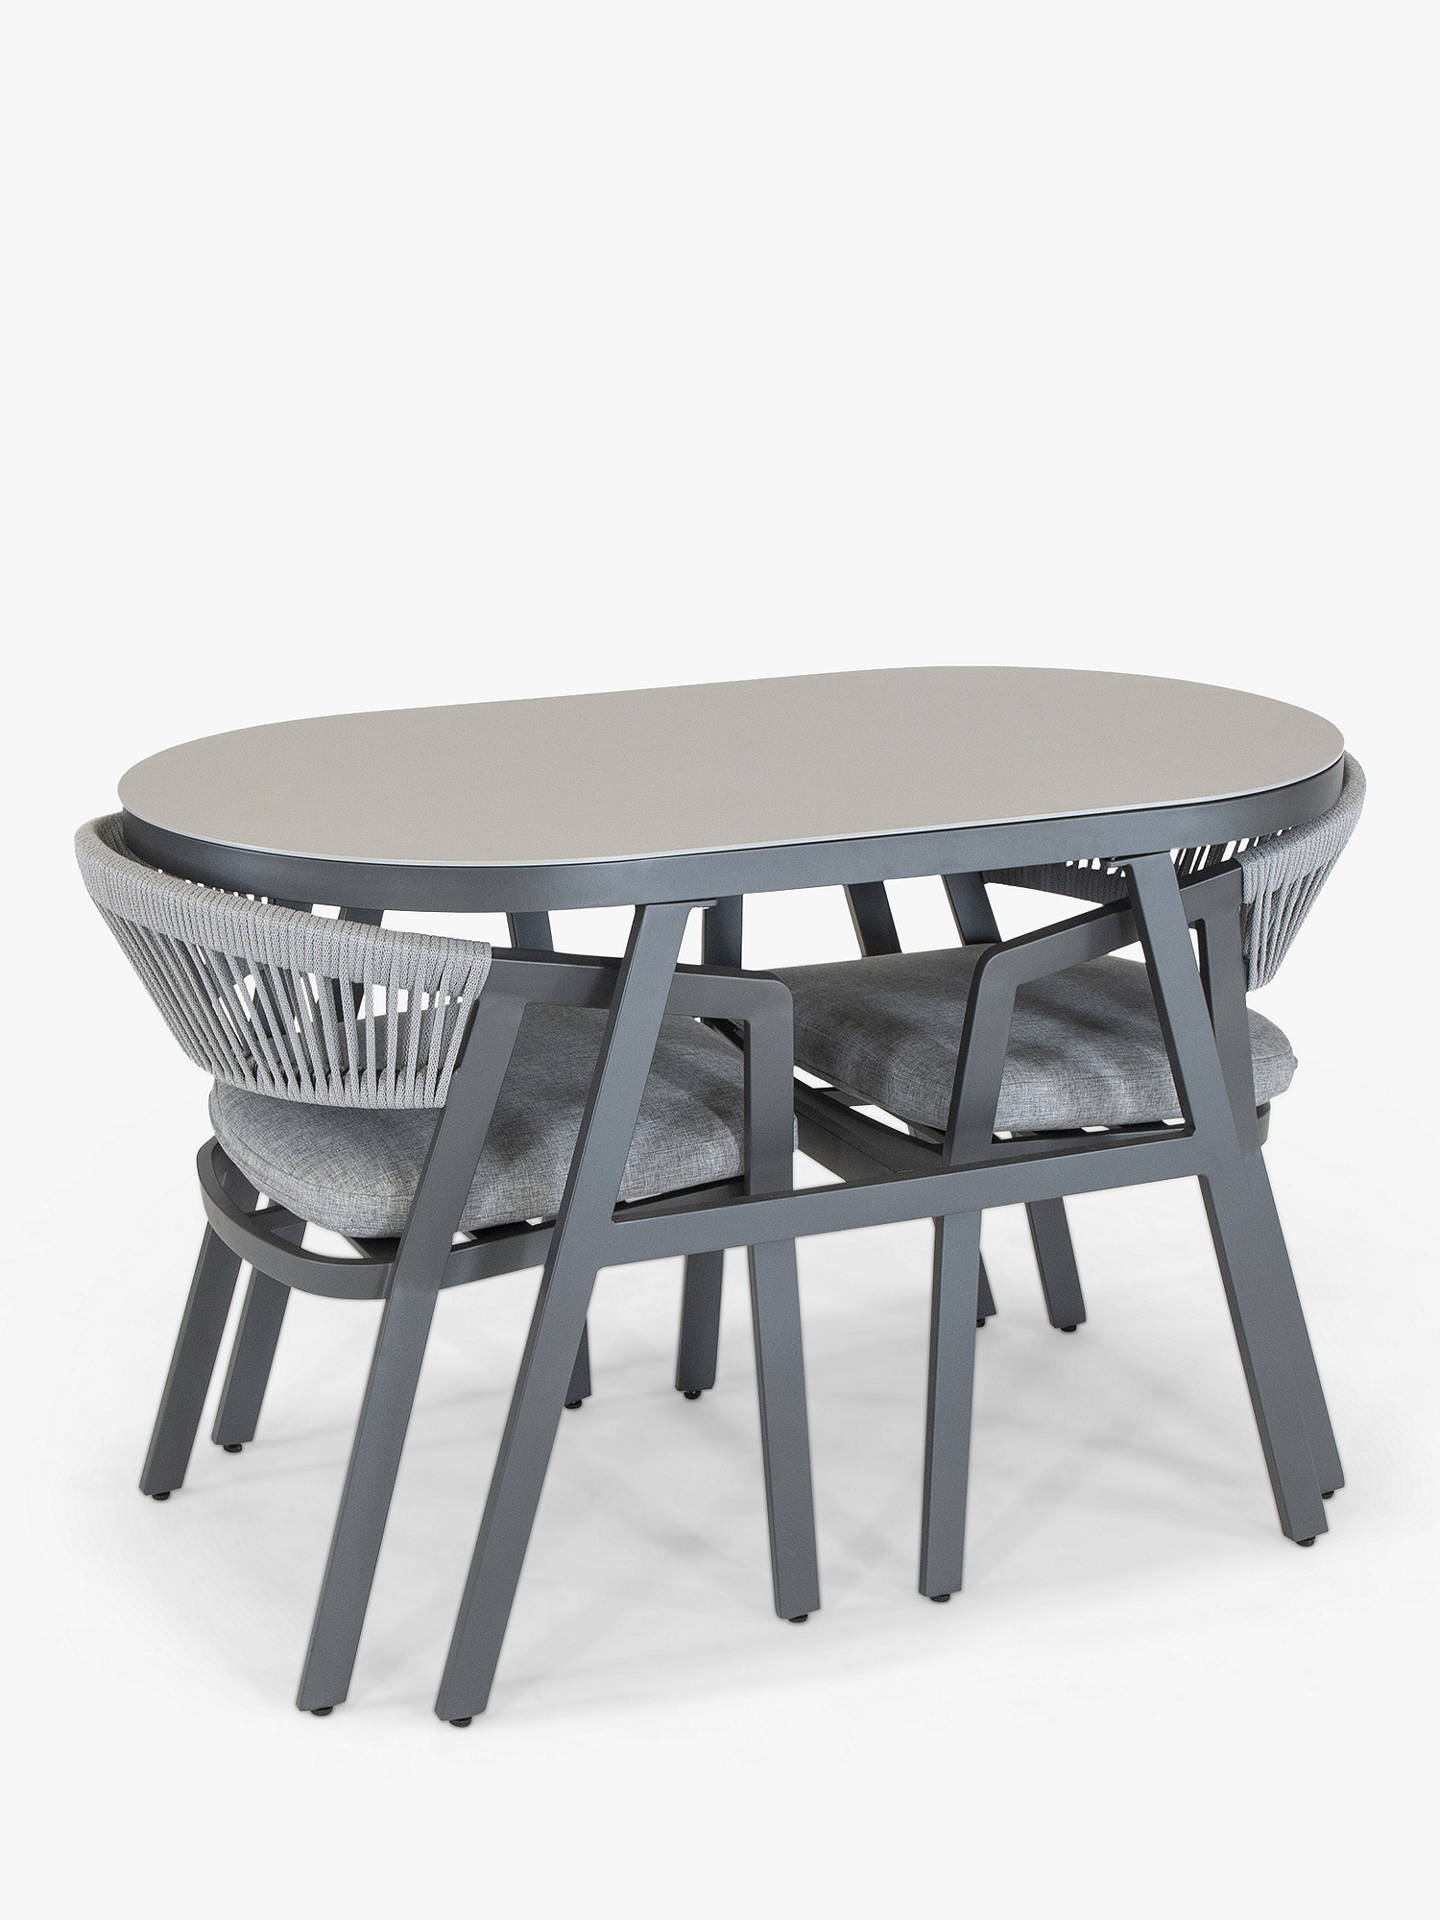 KETTLER Cassis 2-Seater Garden Bistro Table & Chairs Set, Grey at John